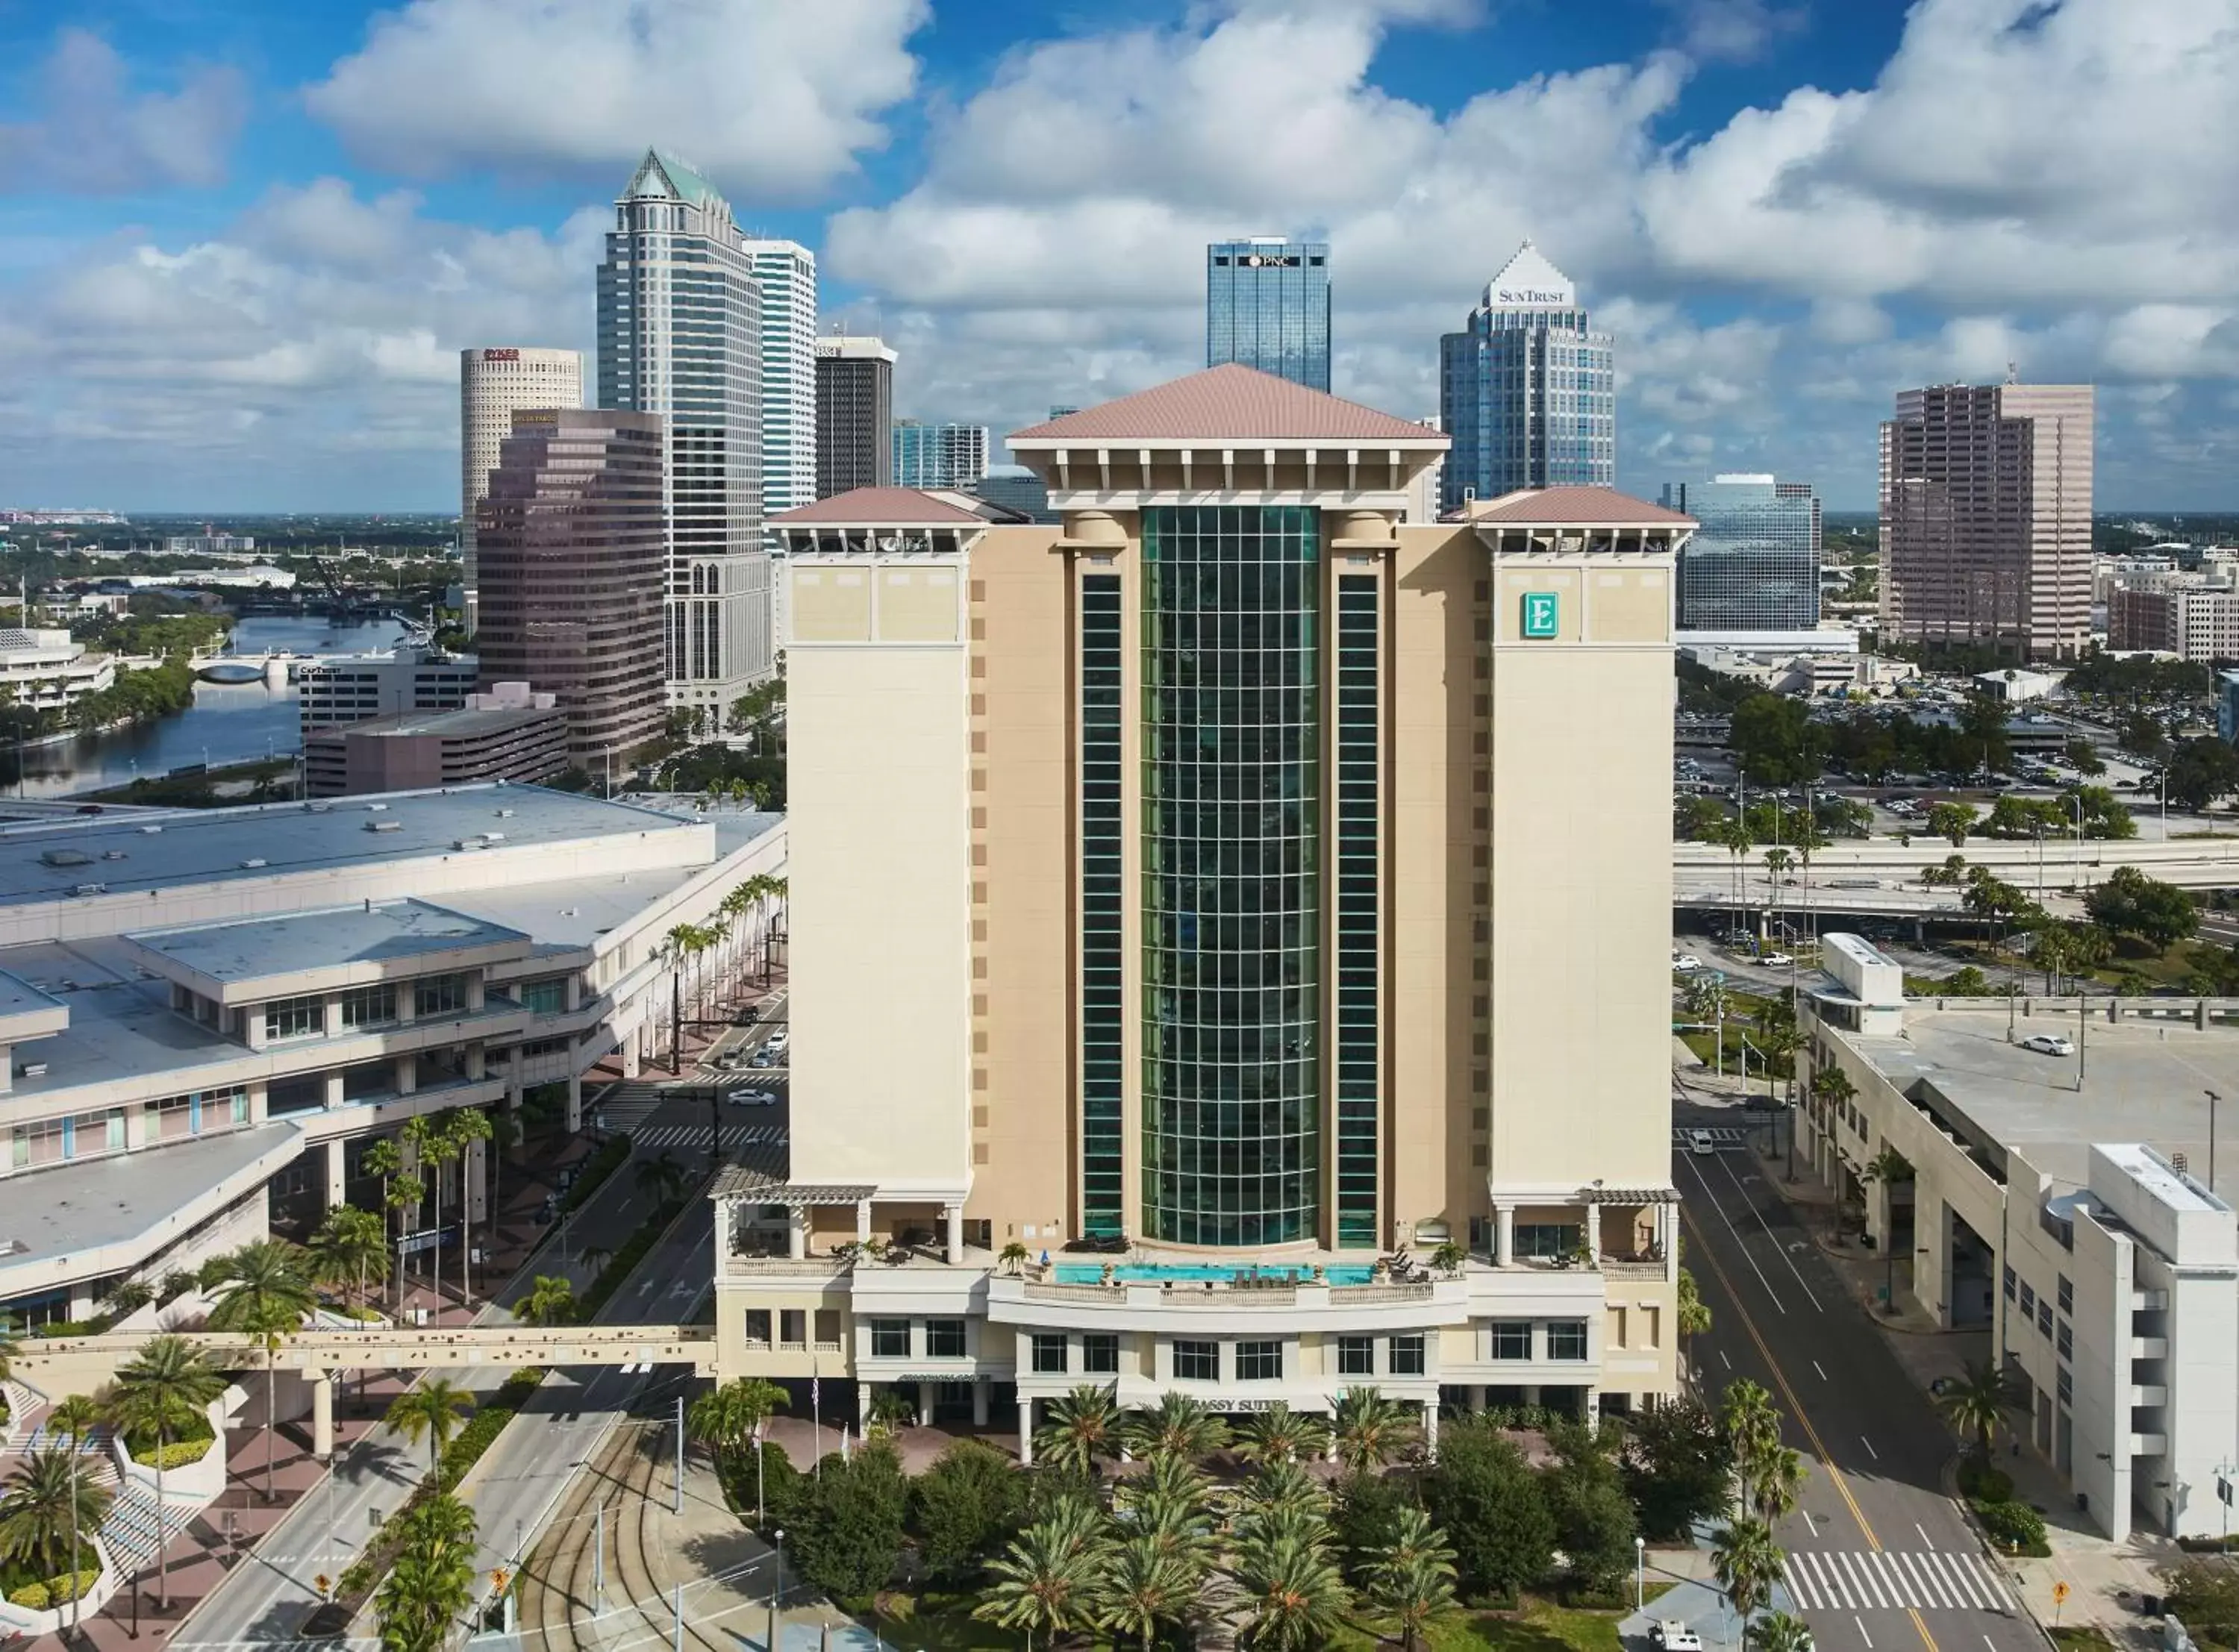 Property building, Bird's-eye View in Embassy Suites by Hilton Tampa Downtown Convention Center